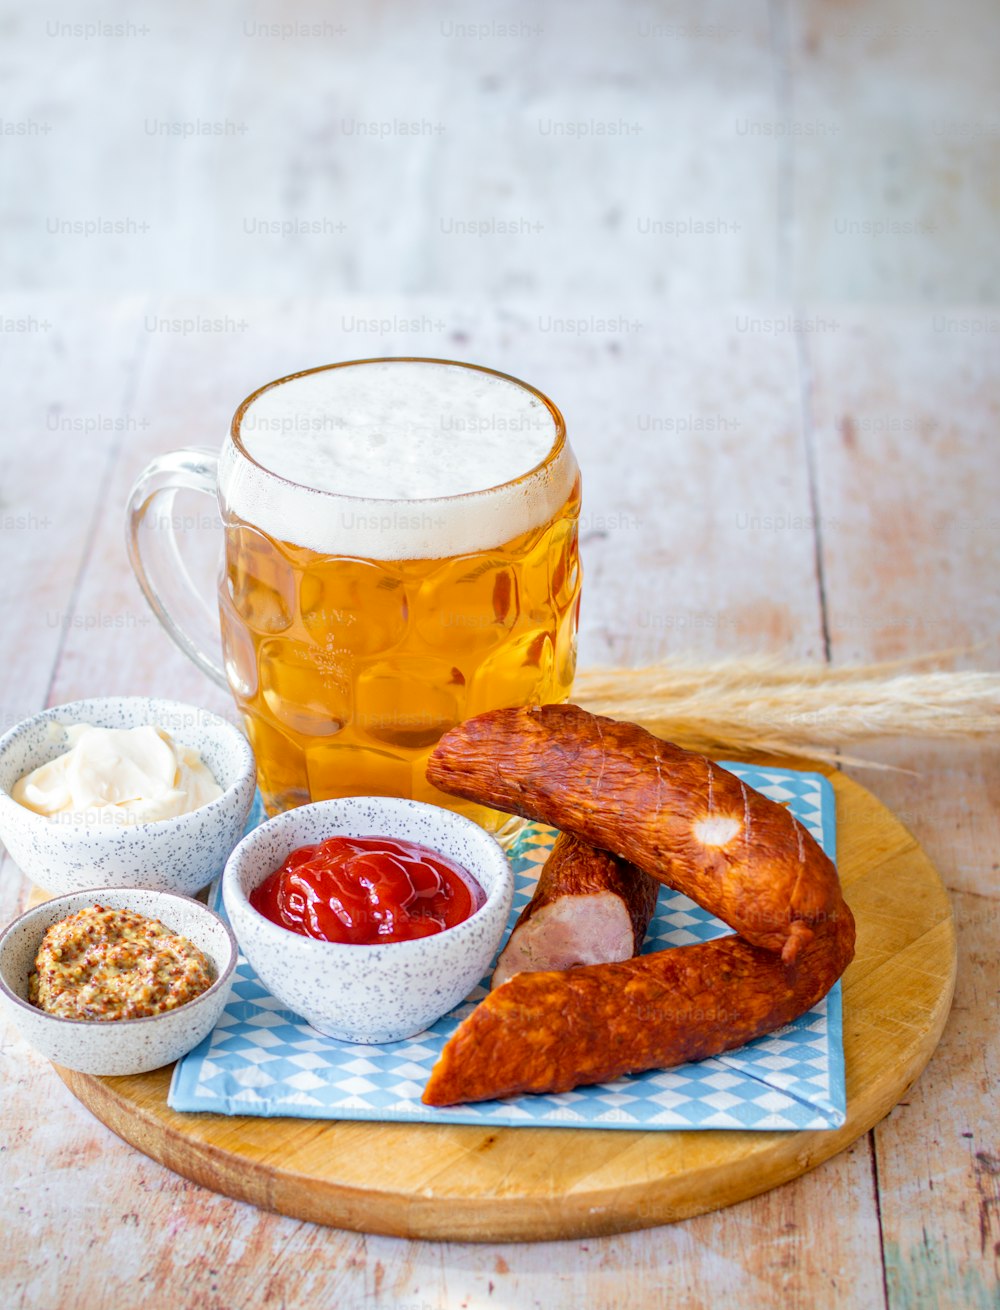 a plate of food and a mug of beer on a table